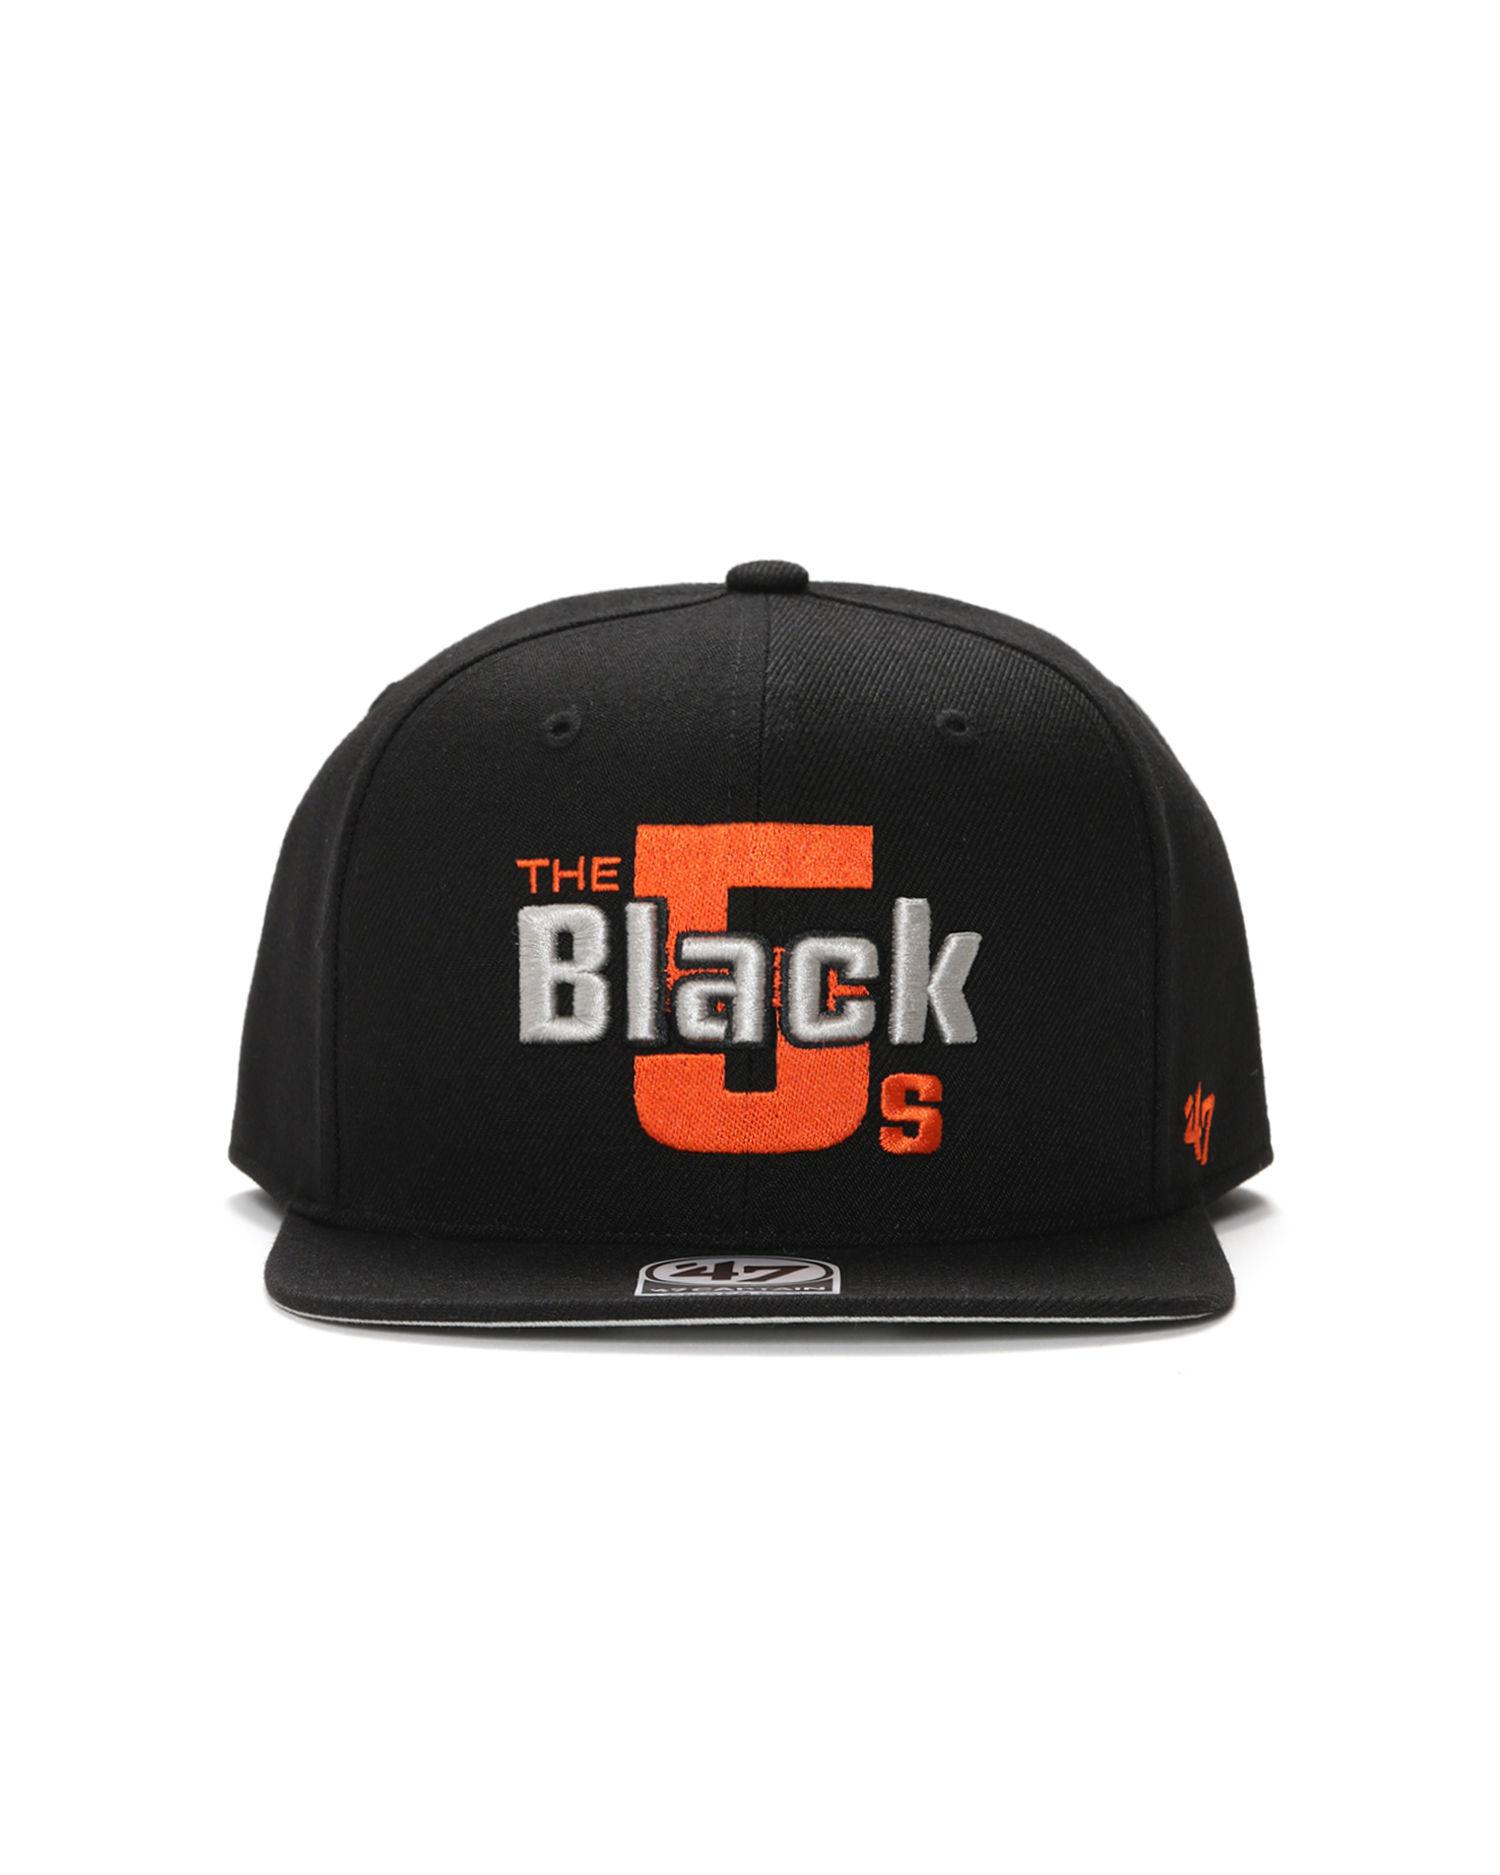 The Black 5s snapback by '47